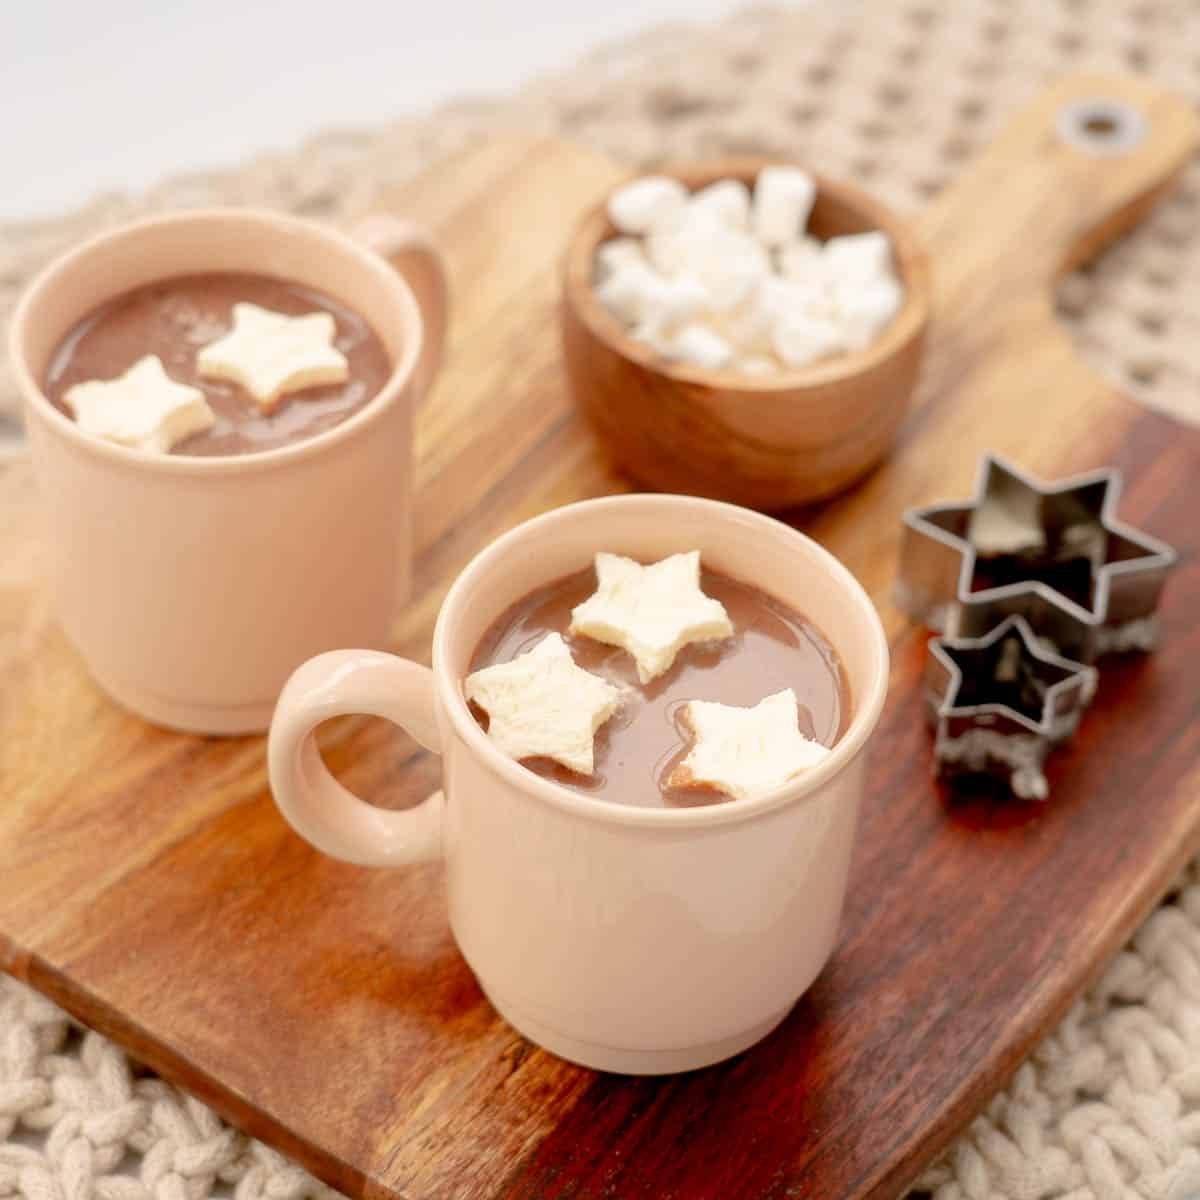 Star Hot Chocolate Toppers - My Kids Lick The Bowl